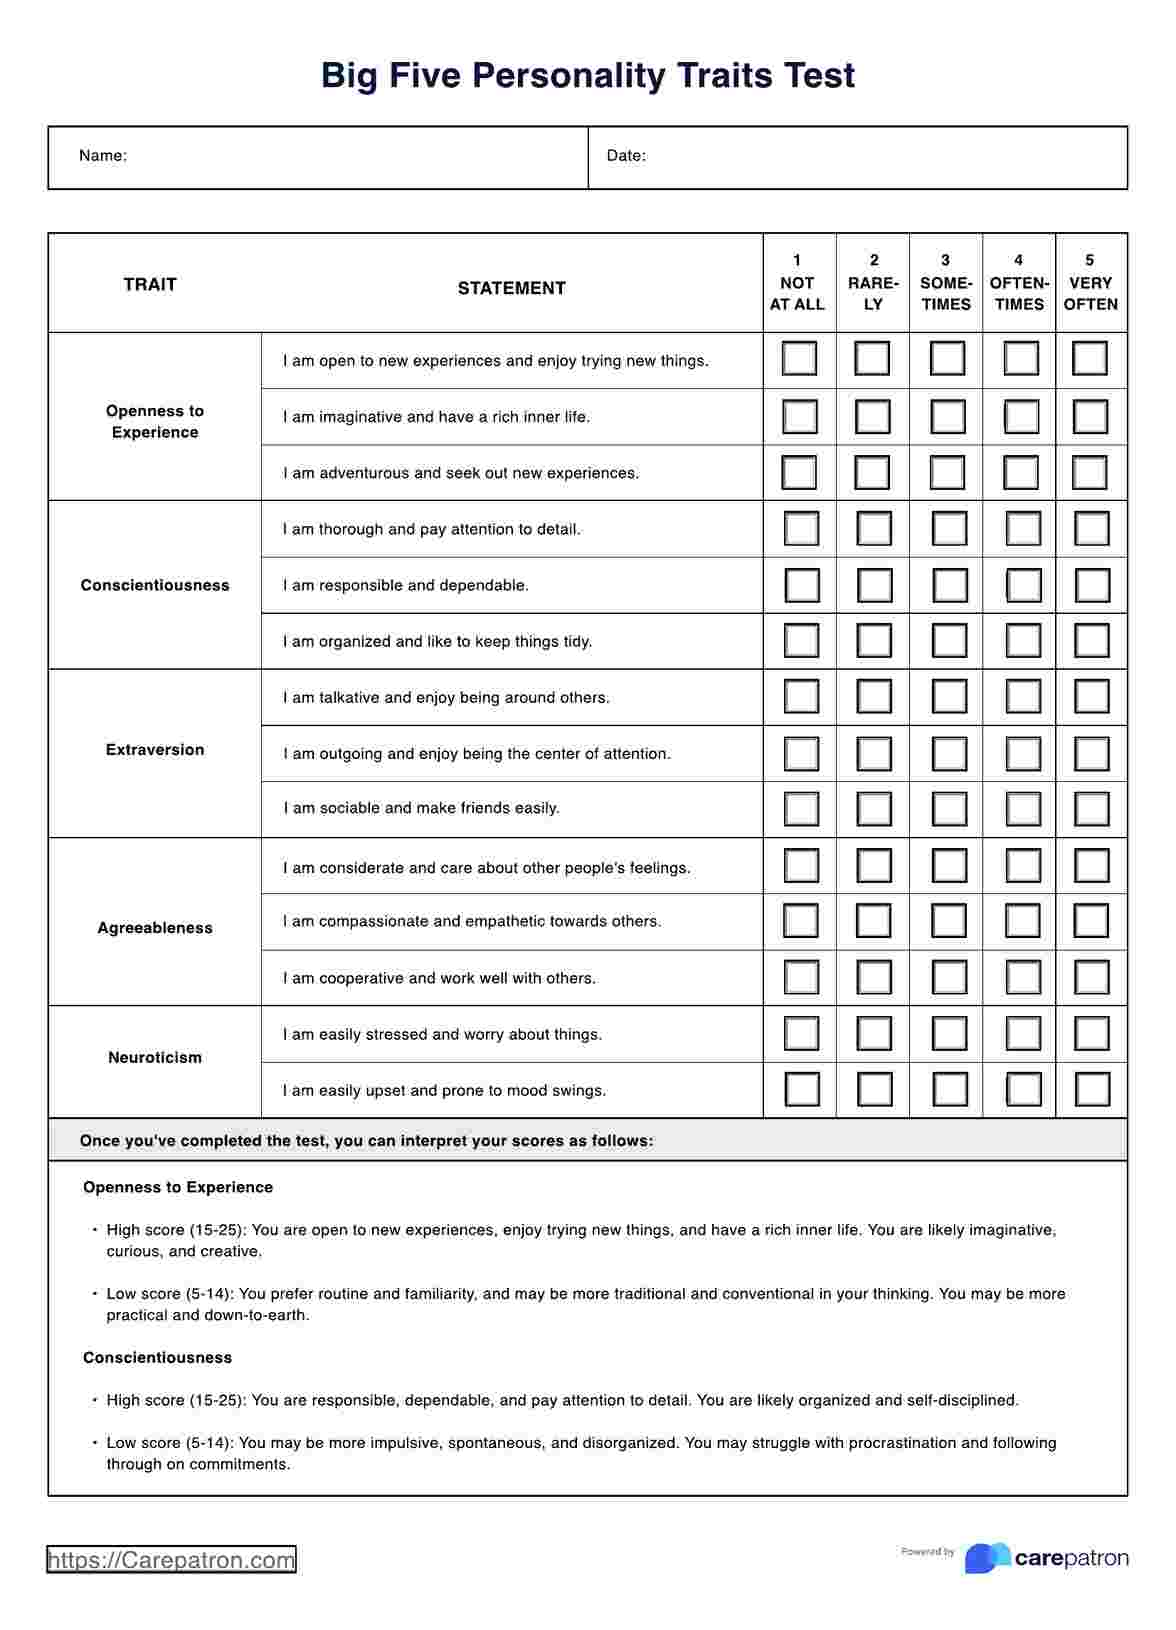 Big 5 Personality Test PDF Example